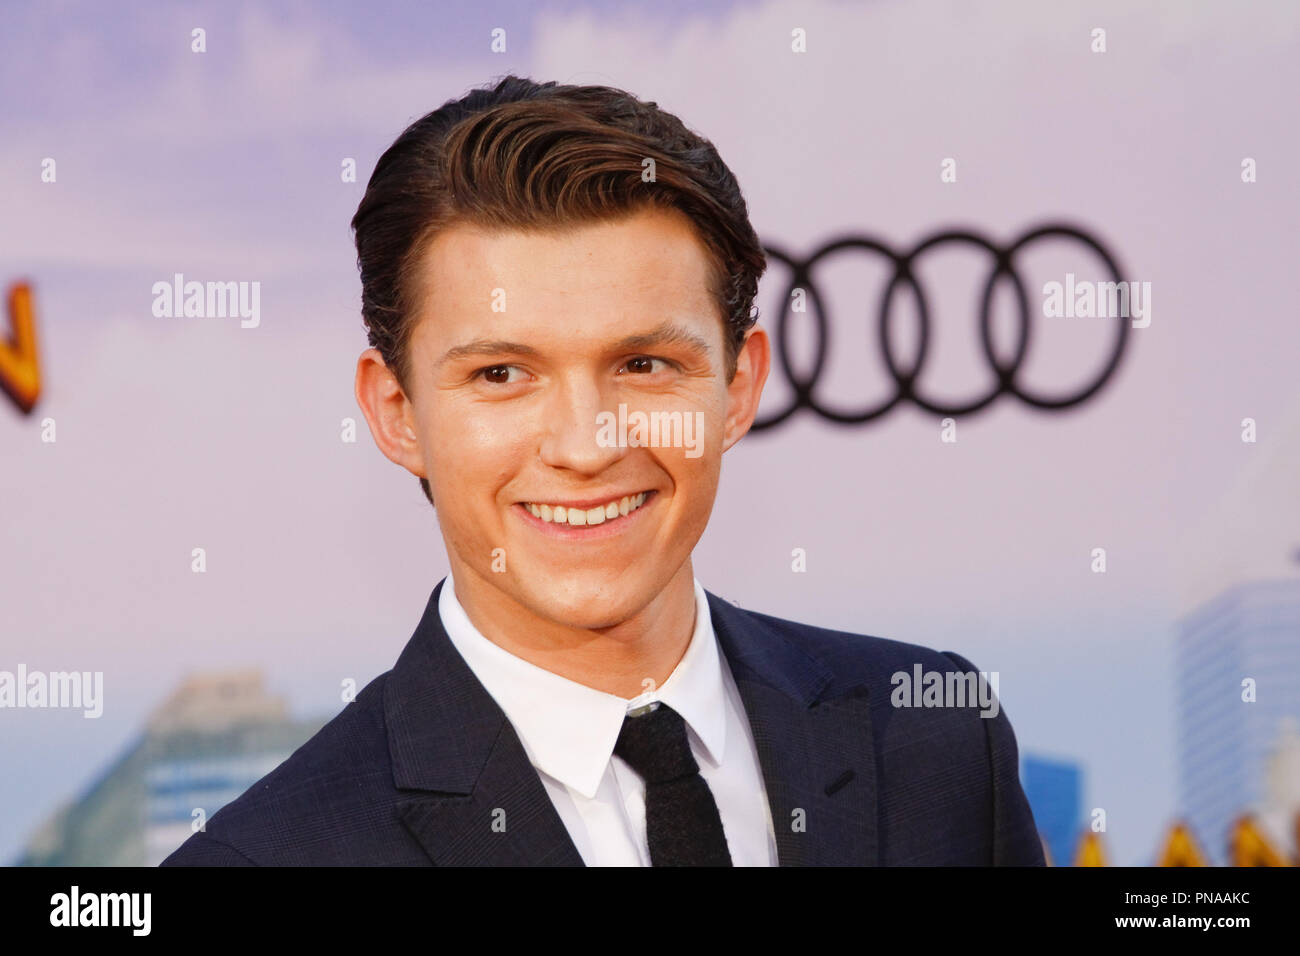 Tom Holland at the World Premiere of Columbia Pictures' 'Spider-Man: Homecoming' held at the TCL Chinese Theater in Hollywood, CA, June 28, 2017. Photo by Joseph Martinez / PictureLux Stock Photo